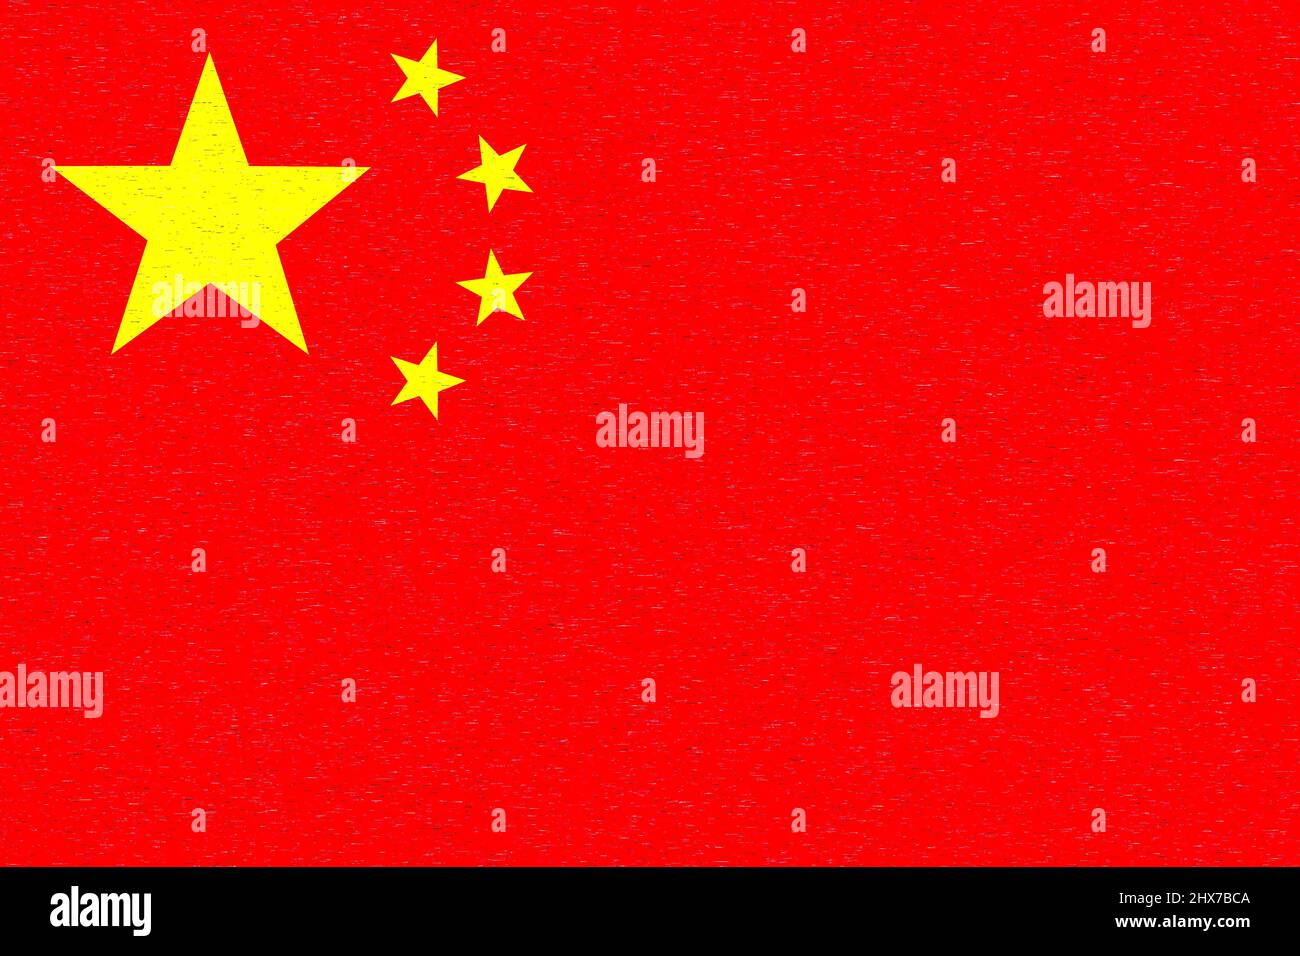 China. Flag of China. Horizontal design. llustration of the flag of People's Republic of China. Horizontal design. Abstract design. Illustration. Map. Stock Photo